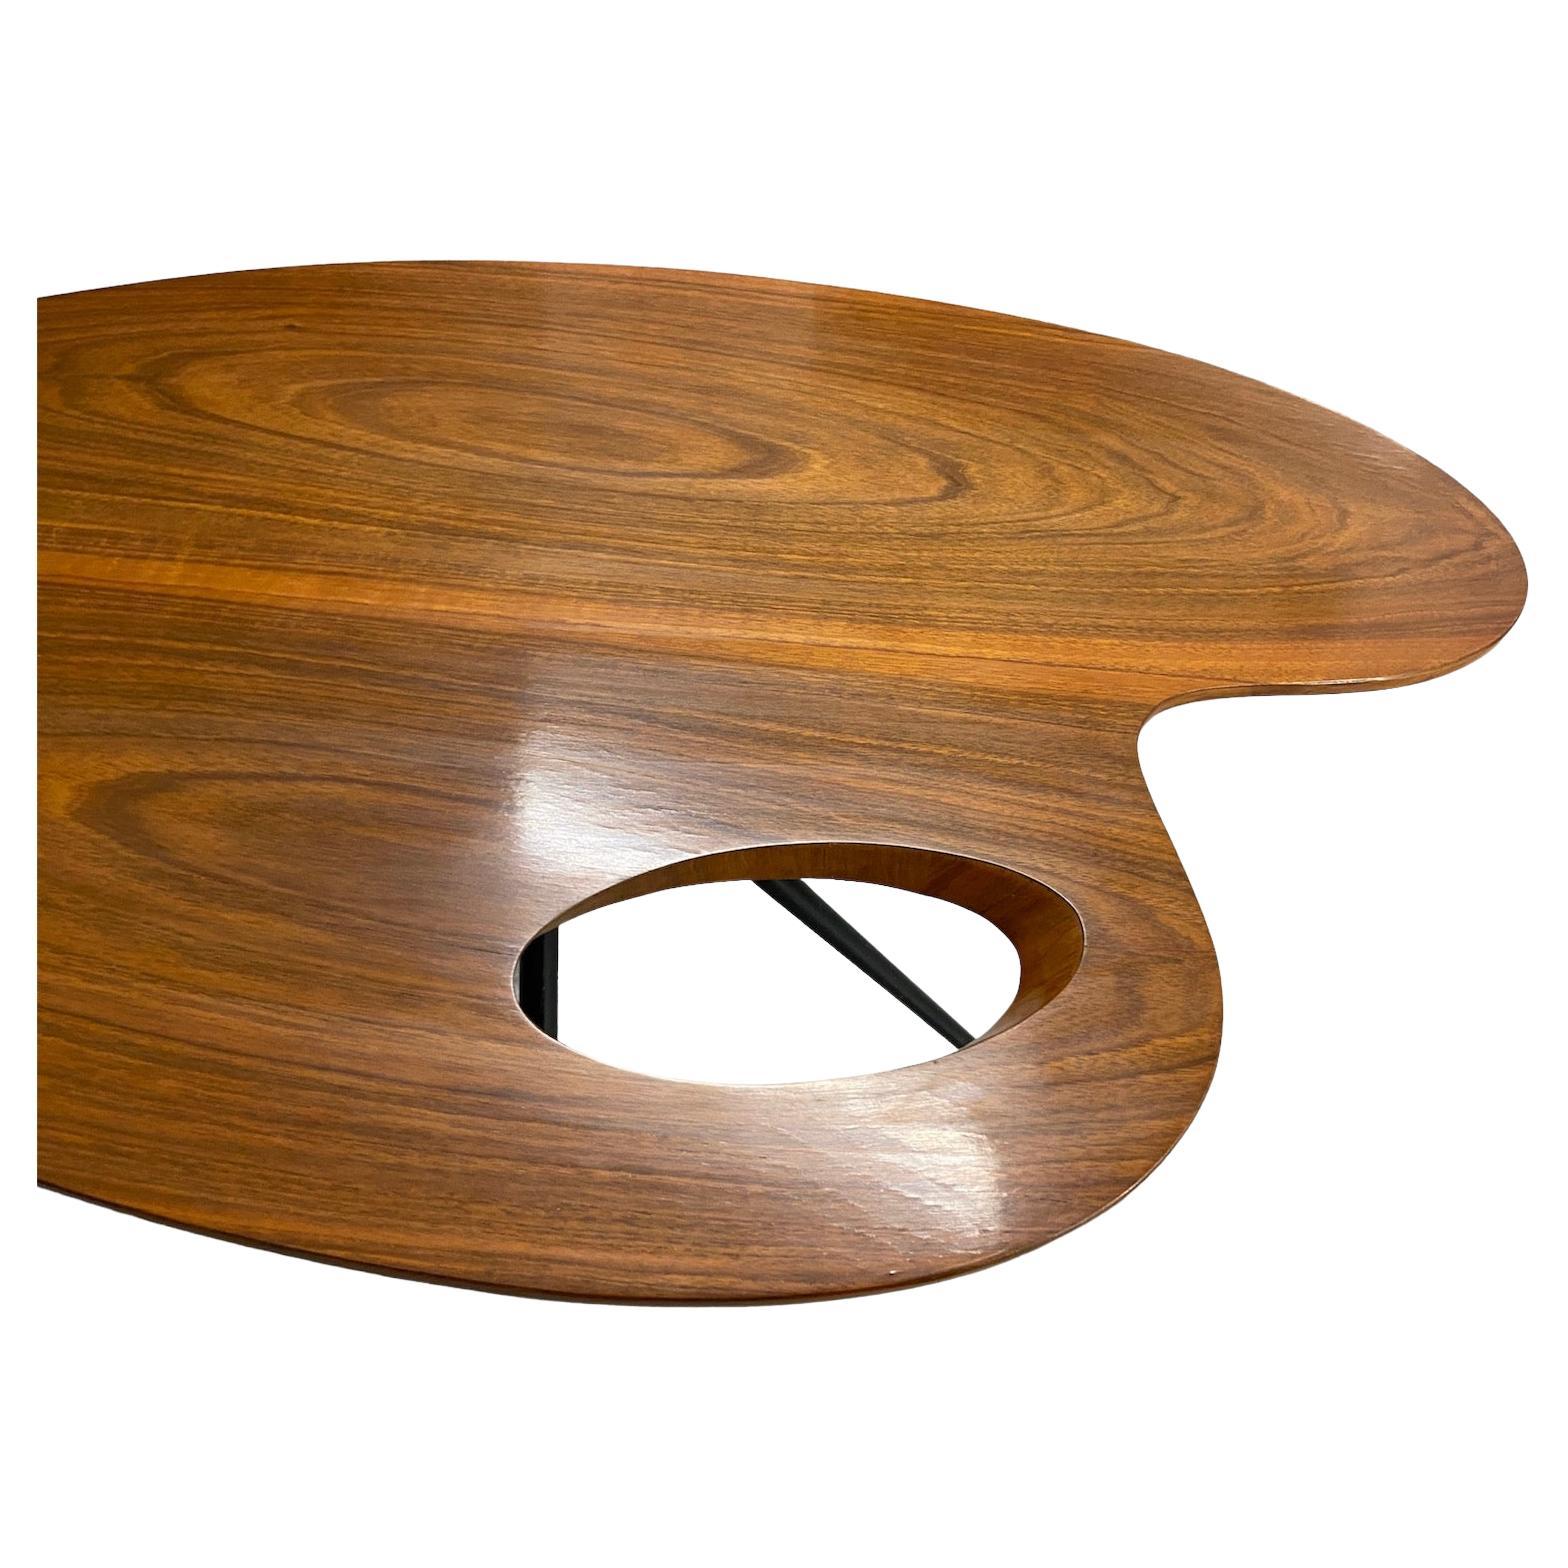 Metal Midcentury Organic Shaped Coffee Table in the Manner of Gio Ponti, circa 1950s For Sale